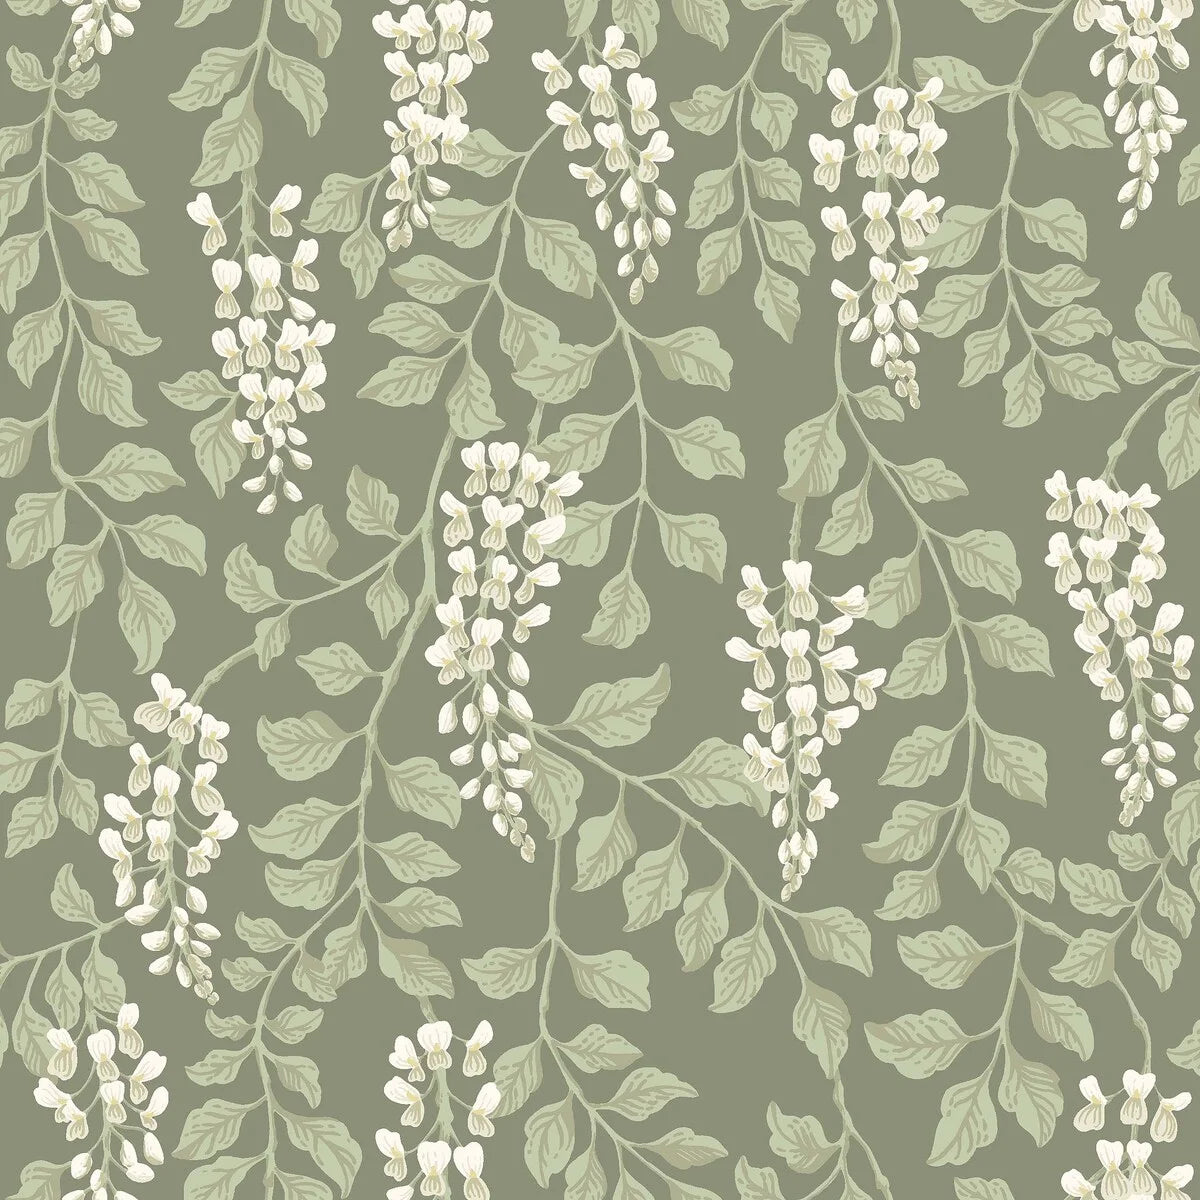 Enjoy natural and harmonious beauty with our Blåregn wallpaper in a dreamy warm green color scheme. 